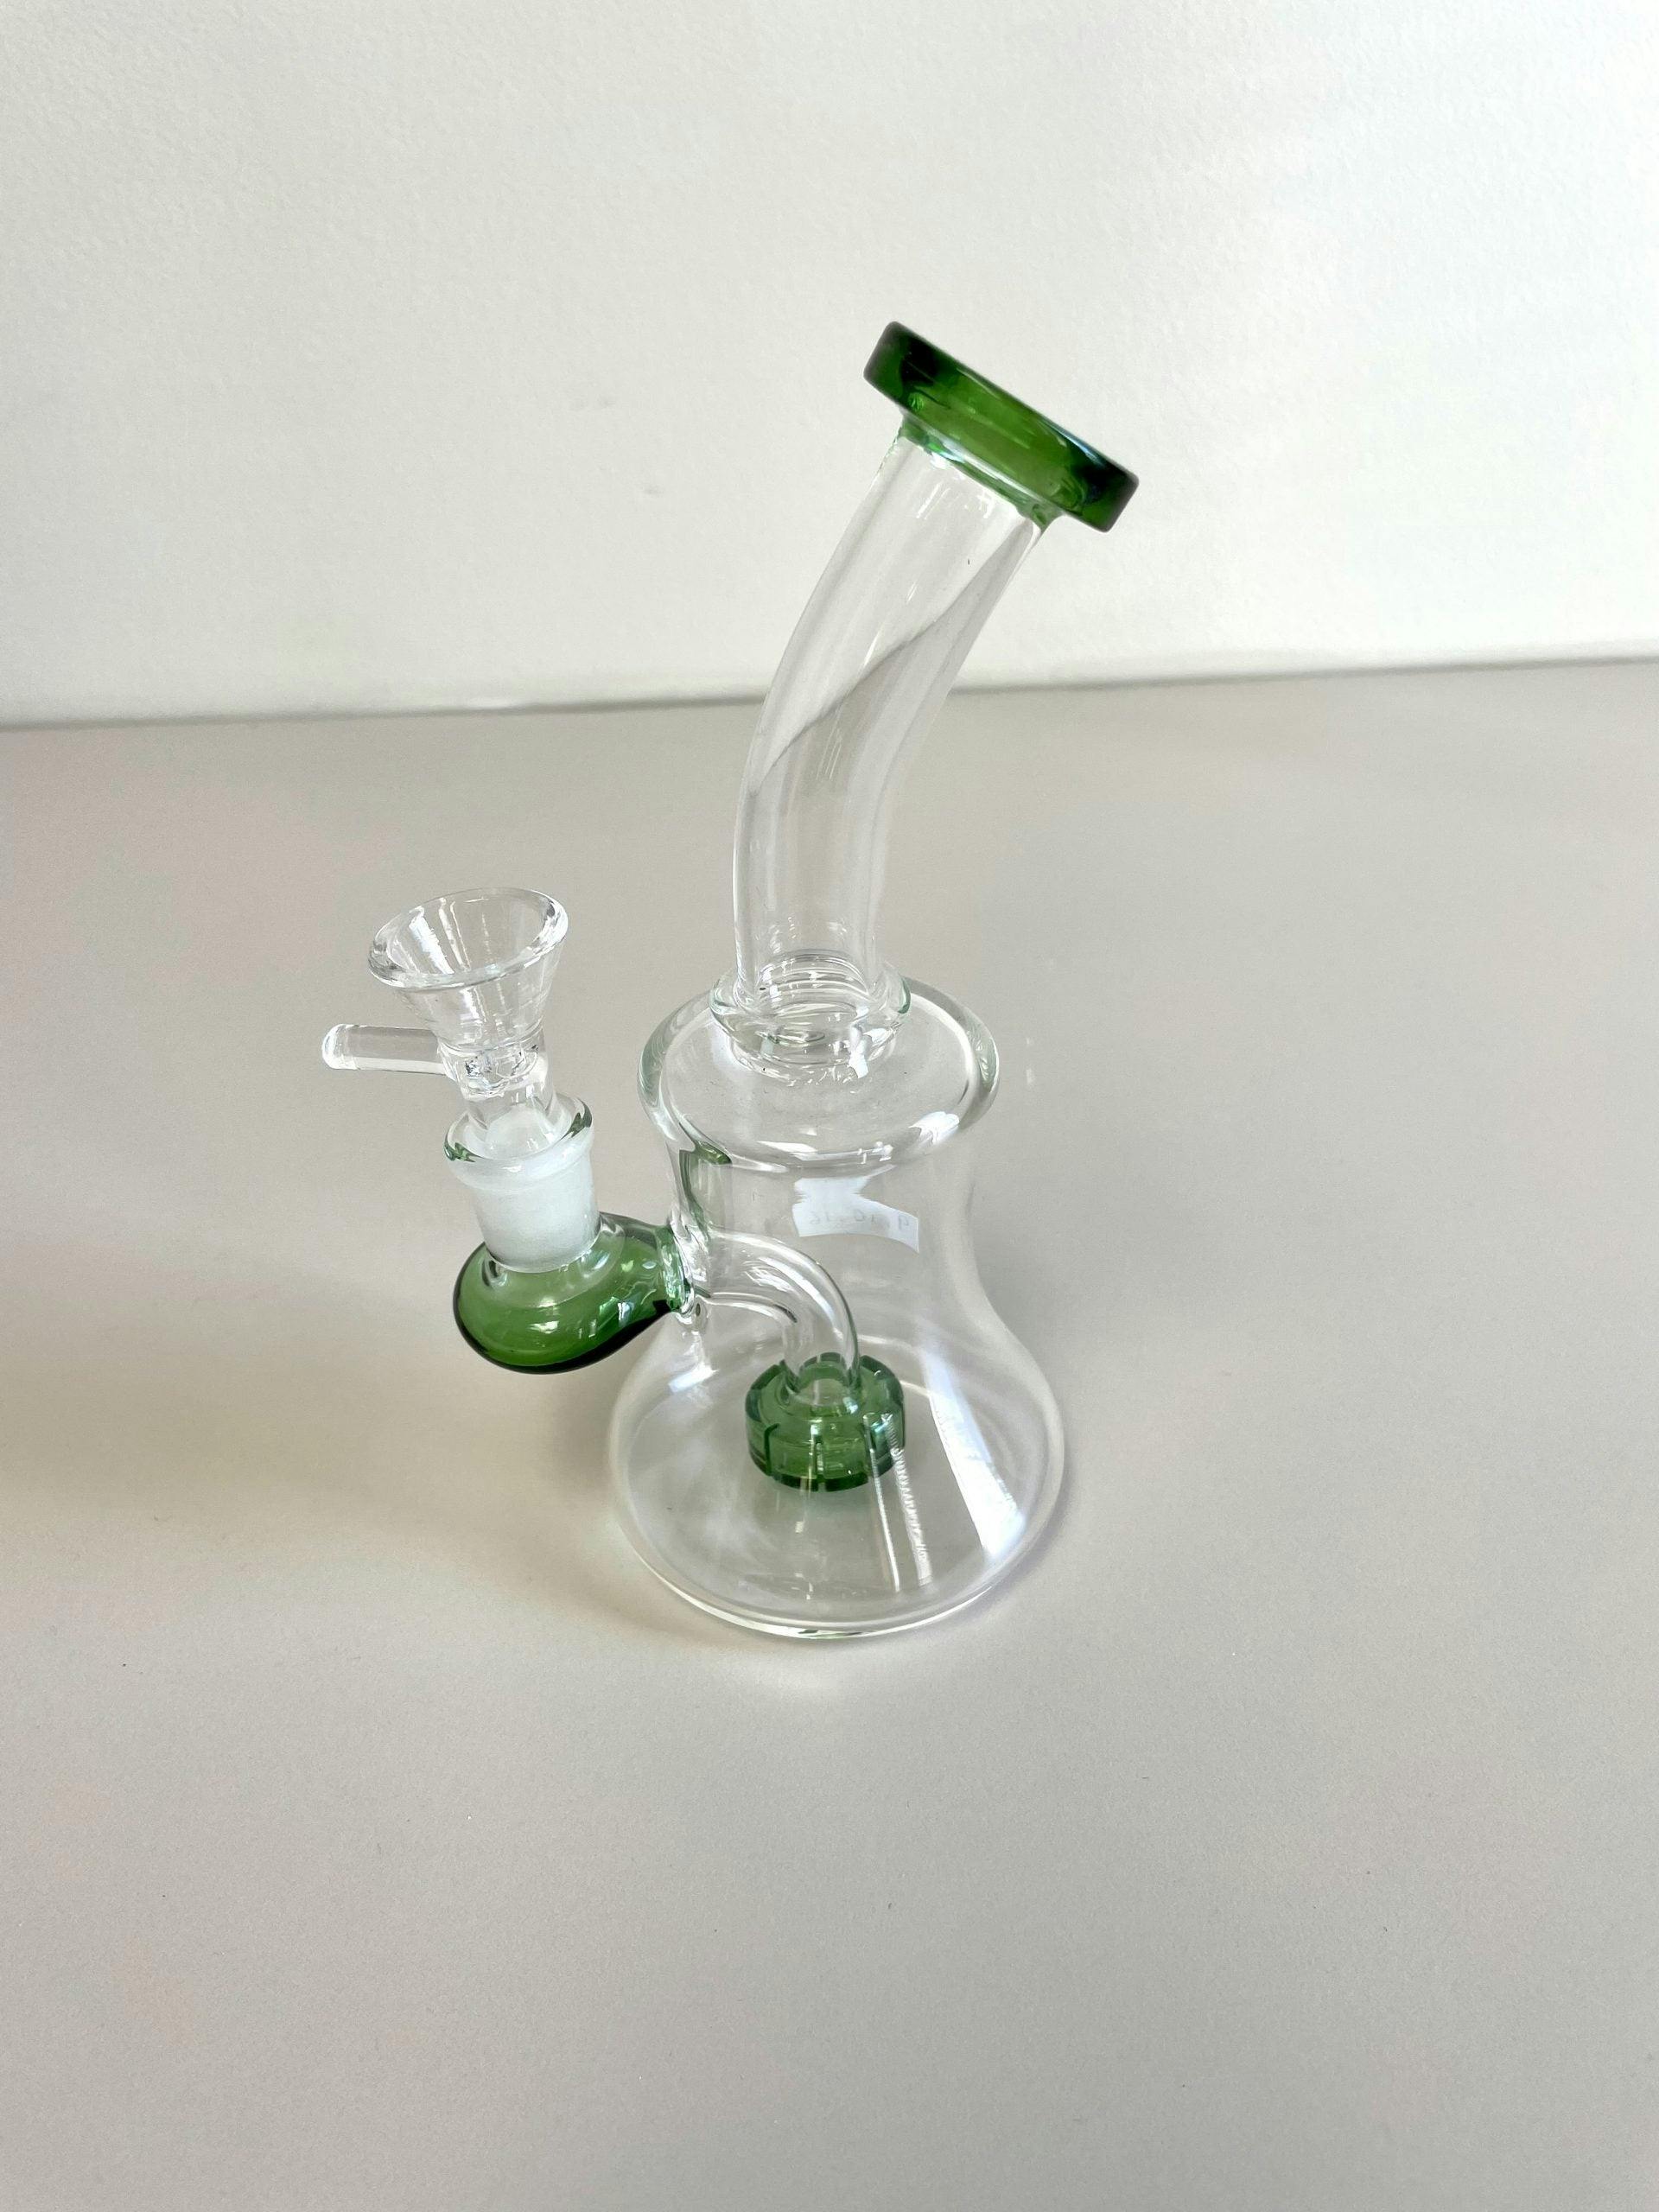 Product for sale: TYI C47-567O- 8" Glass Bong